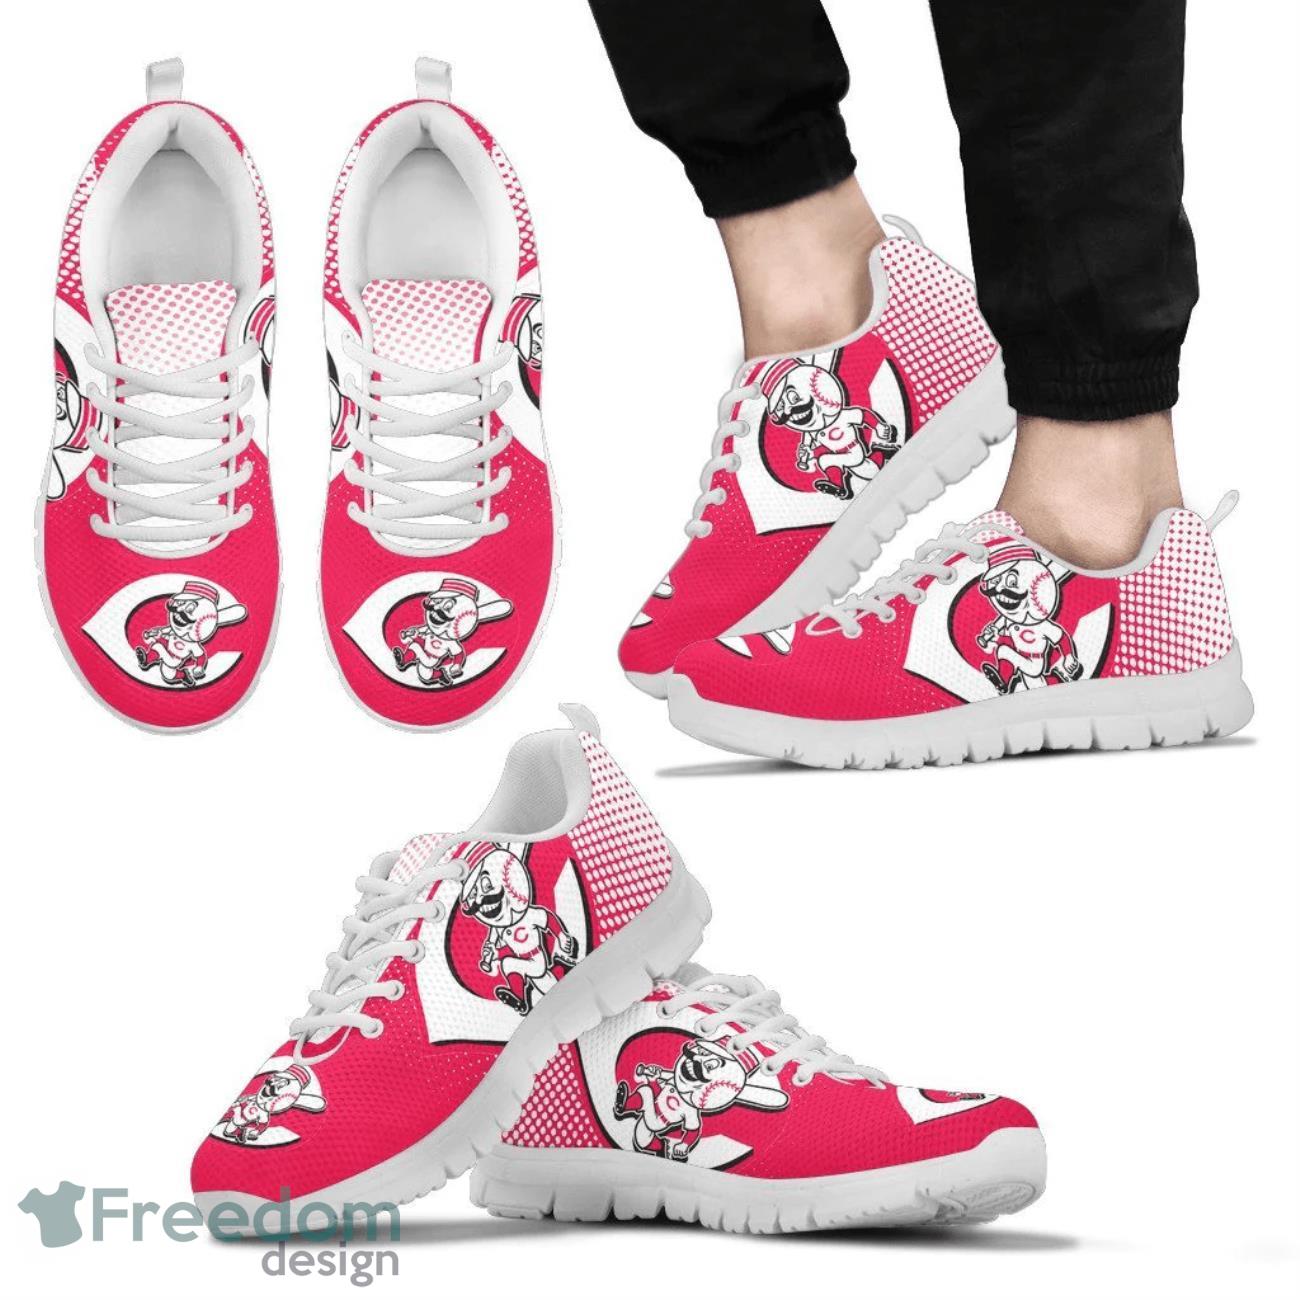 Cincinnati Reds Team Sneakers Limited Sport Shoes Product Photo 2